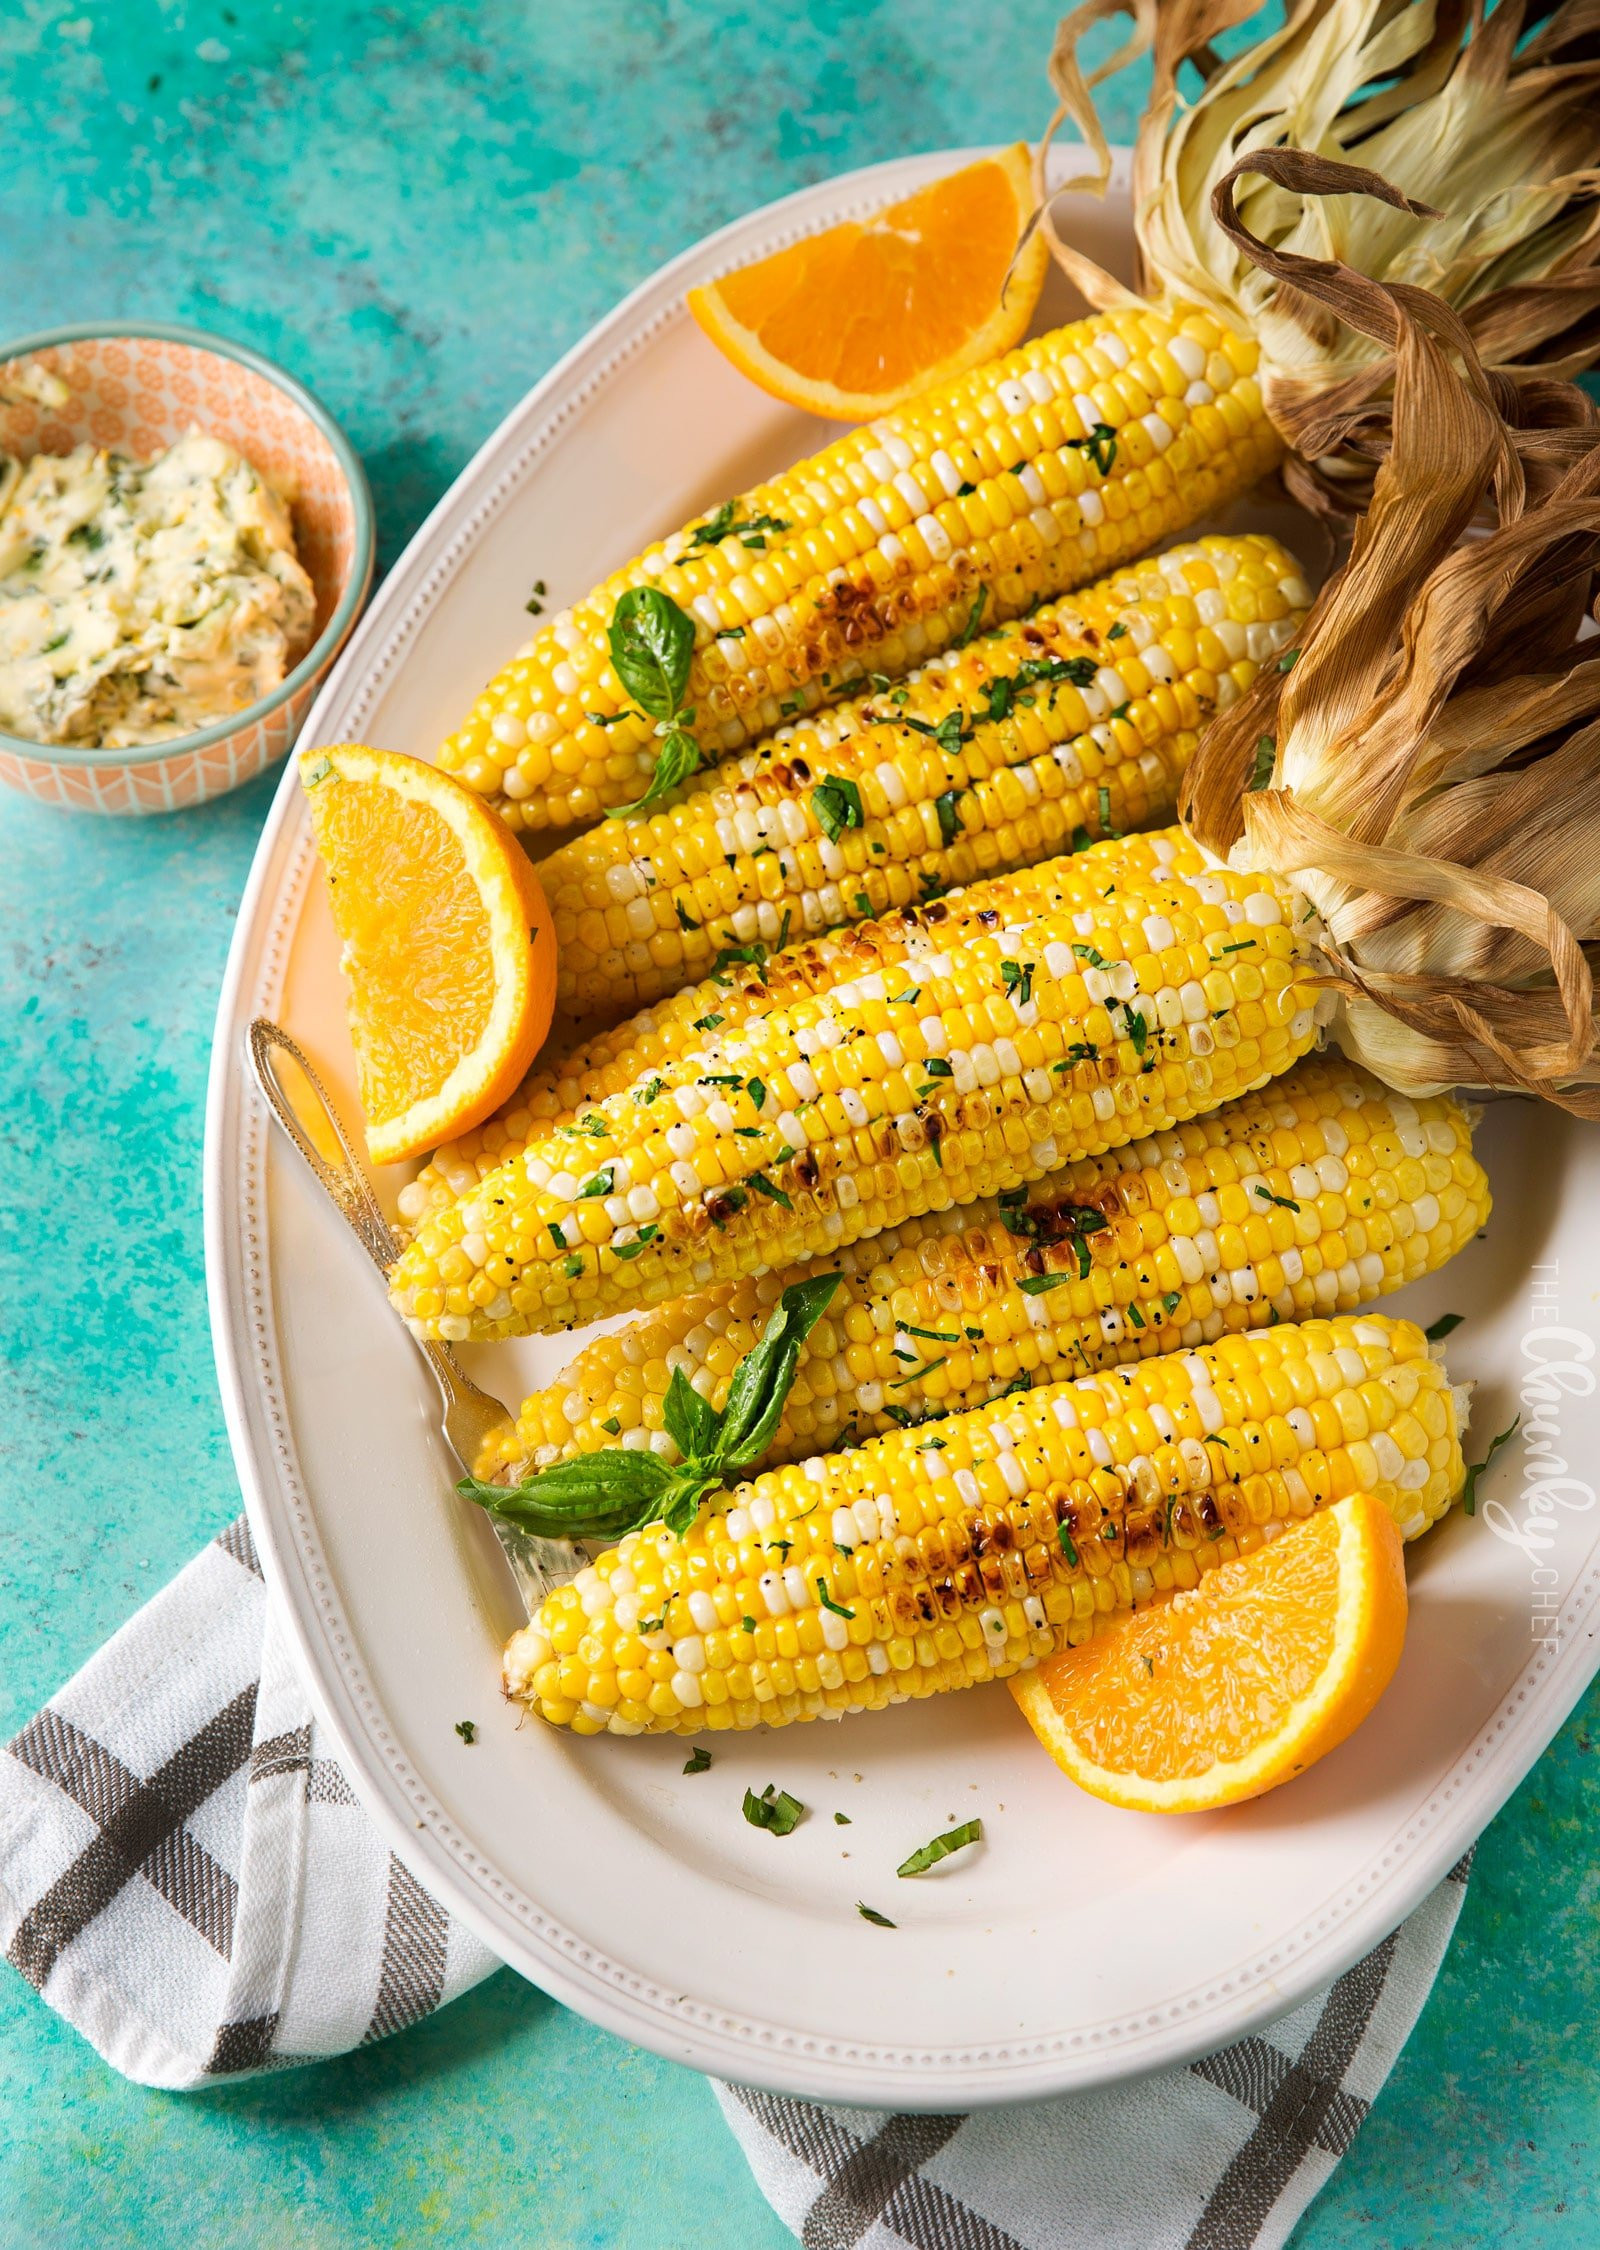 Don’t Miss Our 15 Most Shared Baking Corn On the Cob